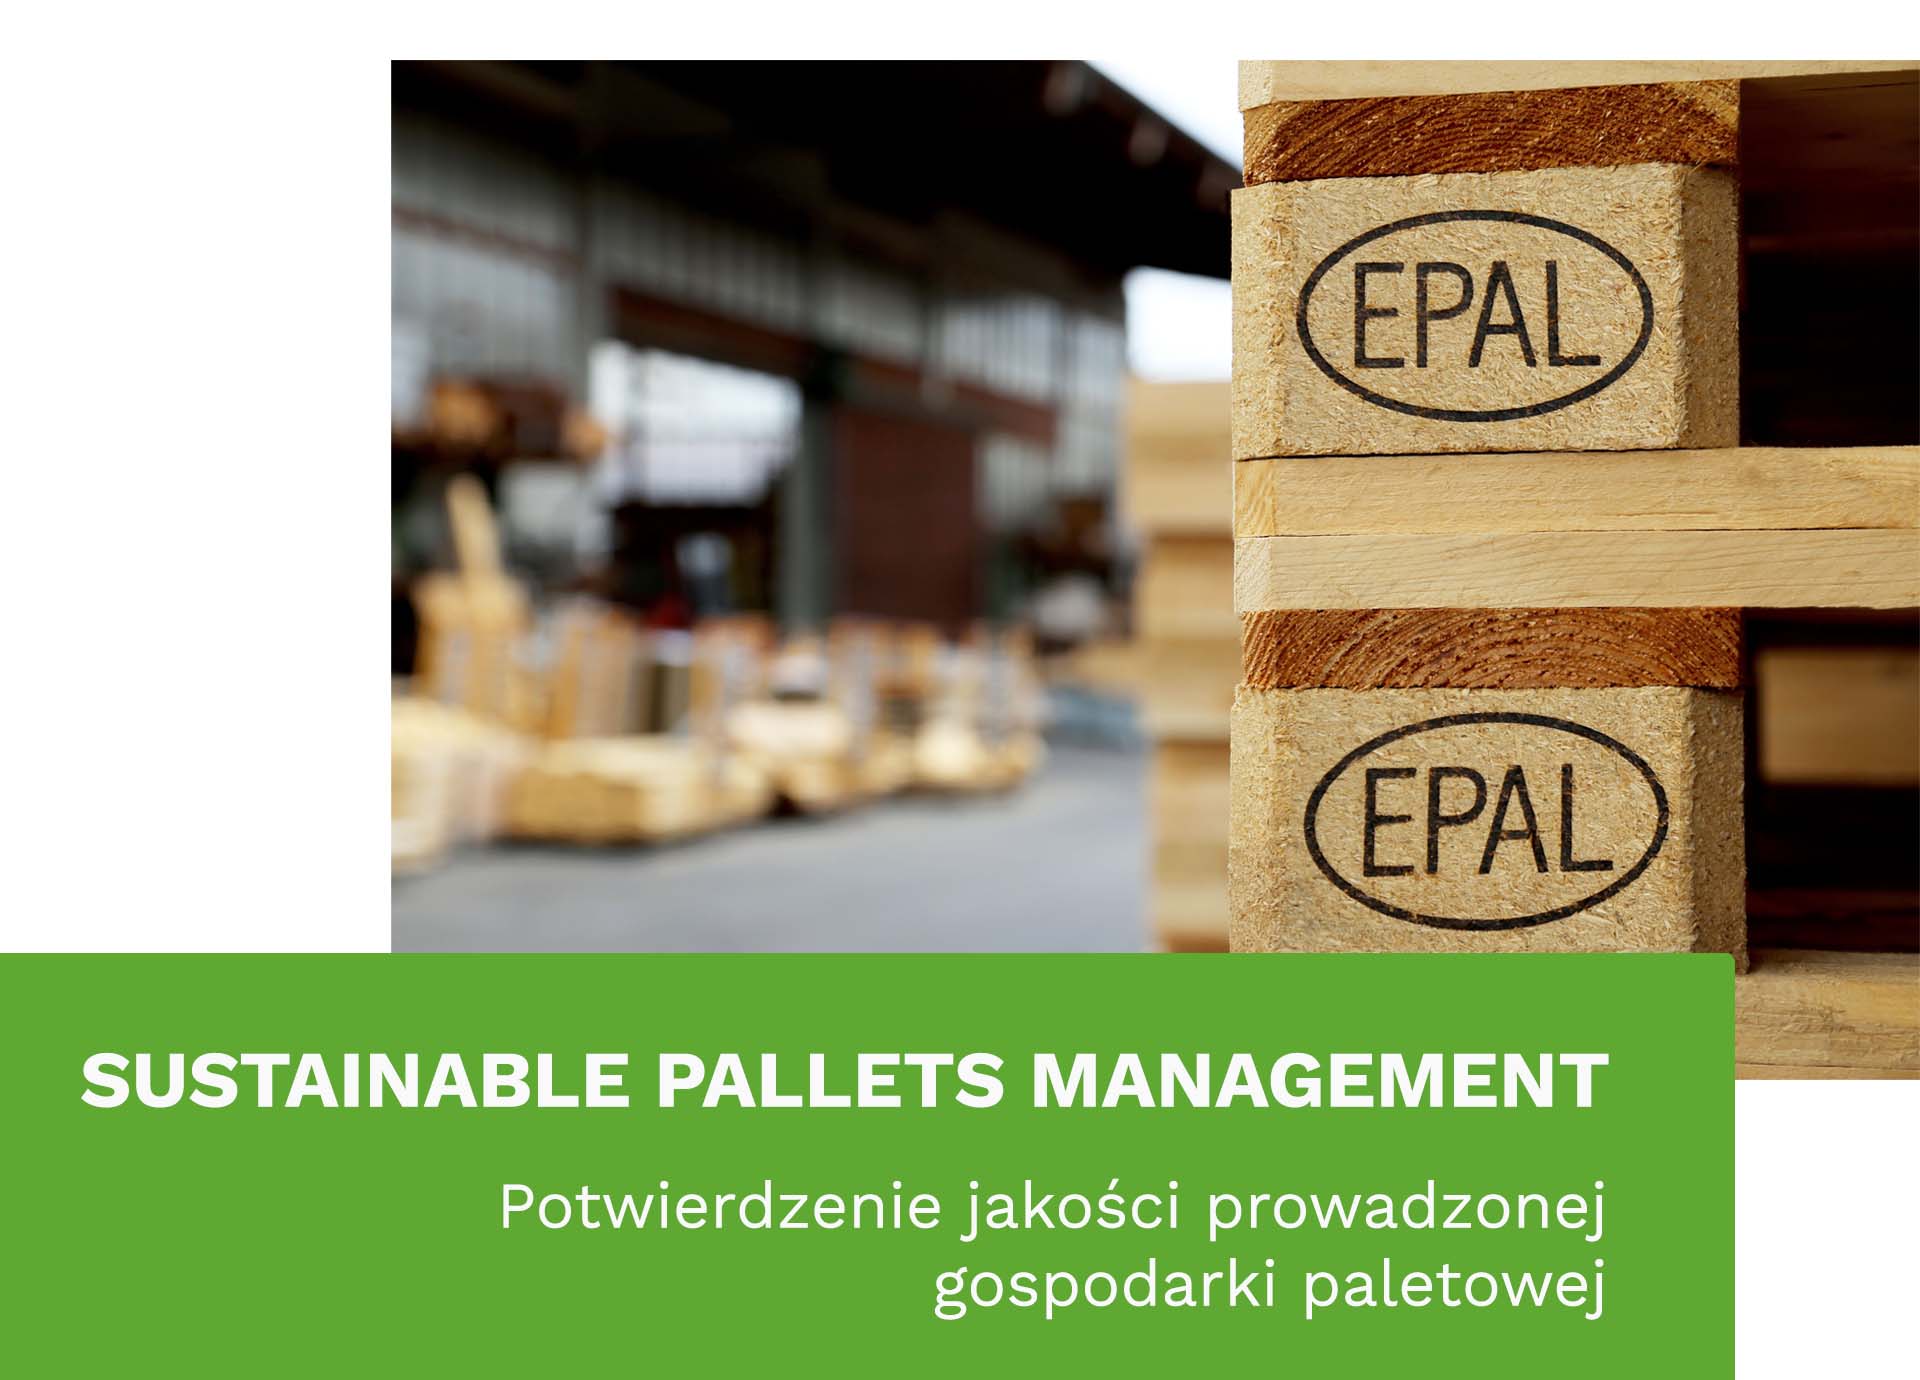 Sustainable Pallets Management - paleta EPAL w magazynie